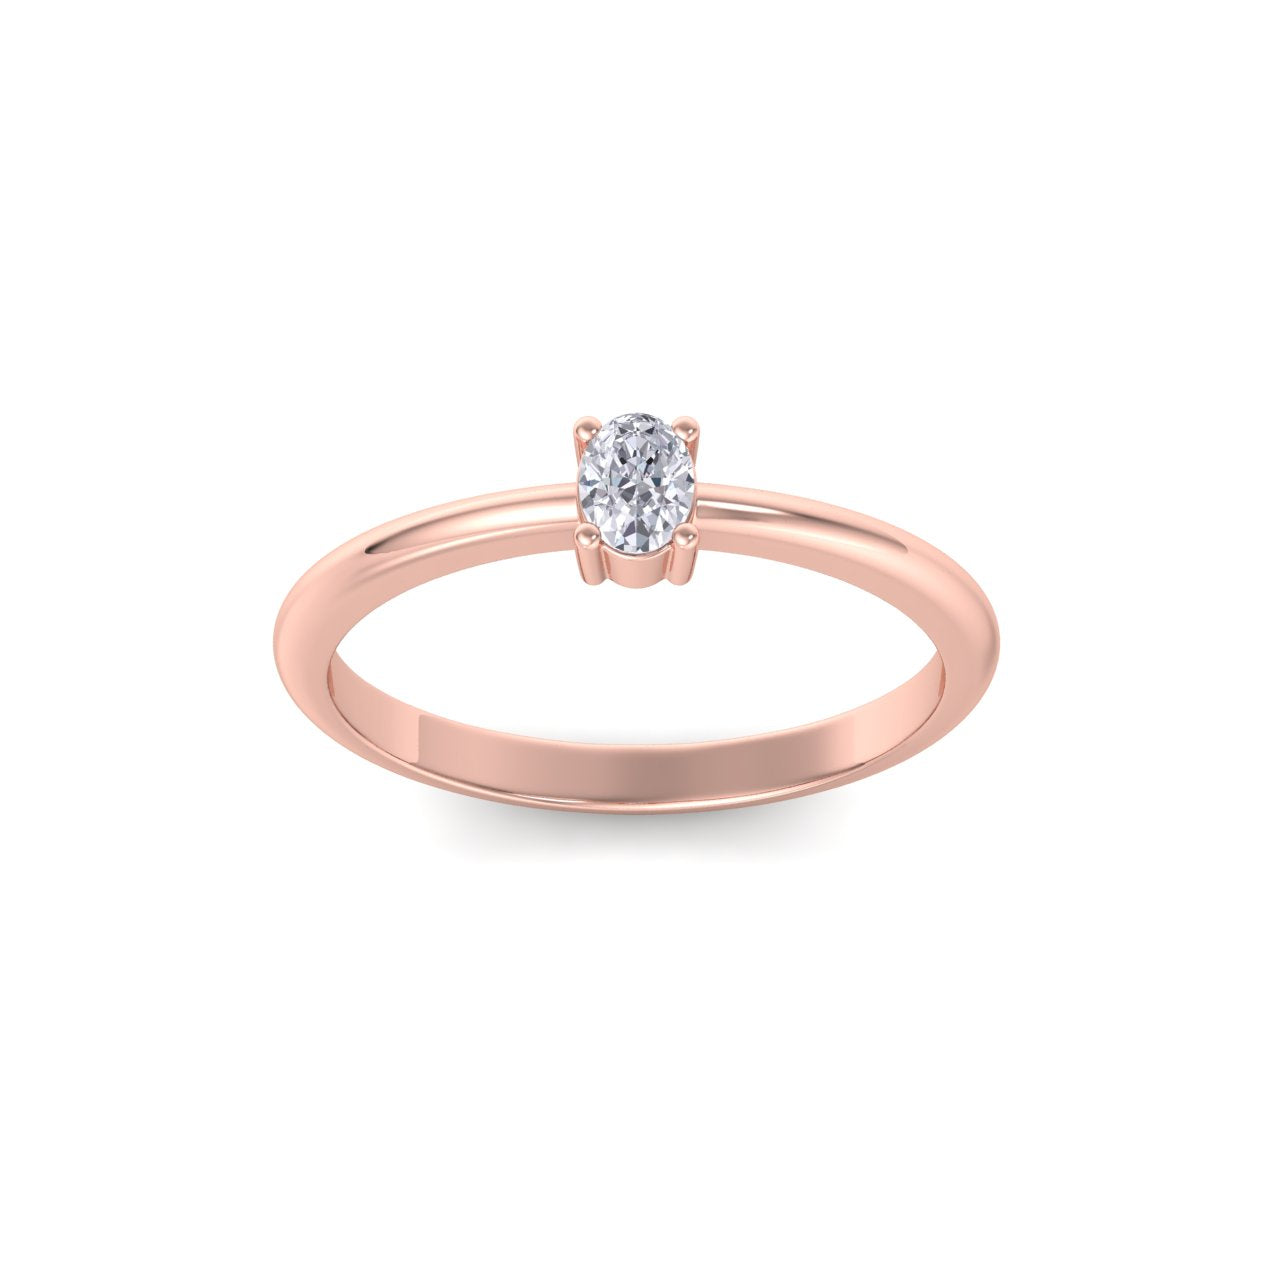 Beautiful Diamond ring in rose gold with white diamonds of 0.25 ct in weight